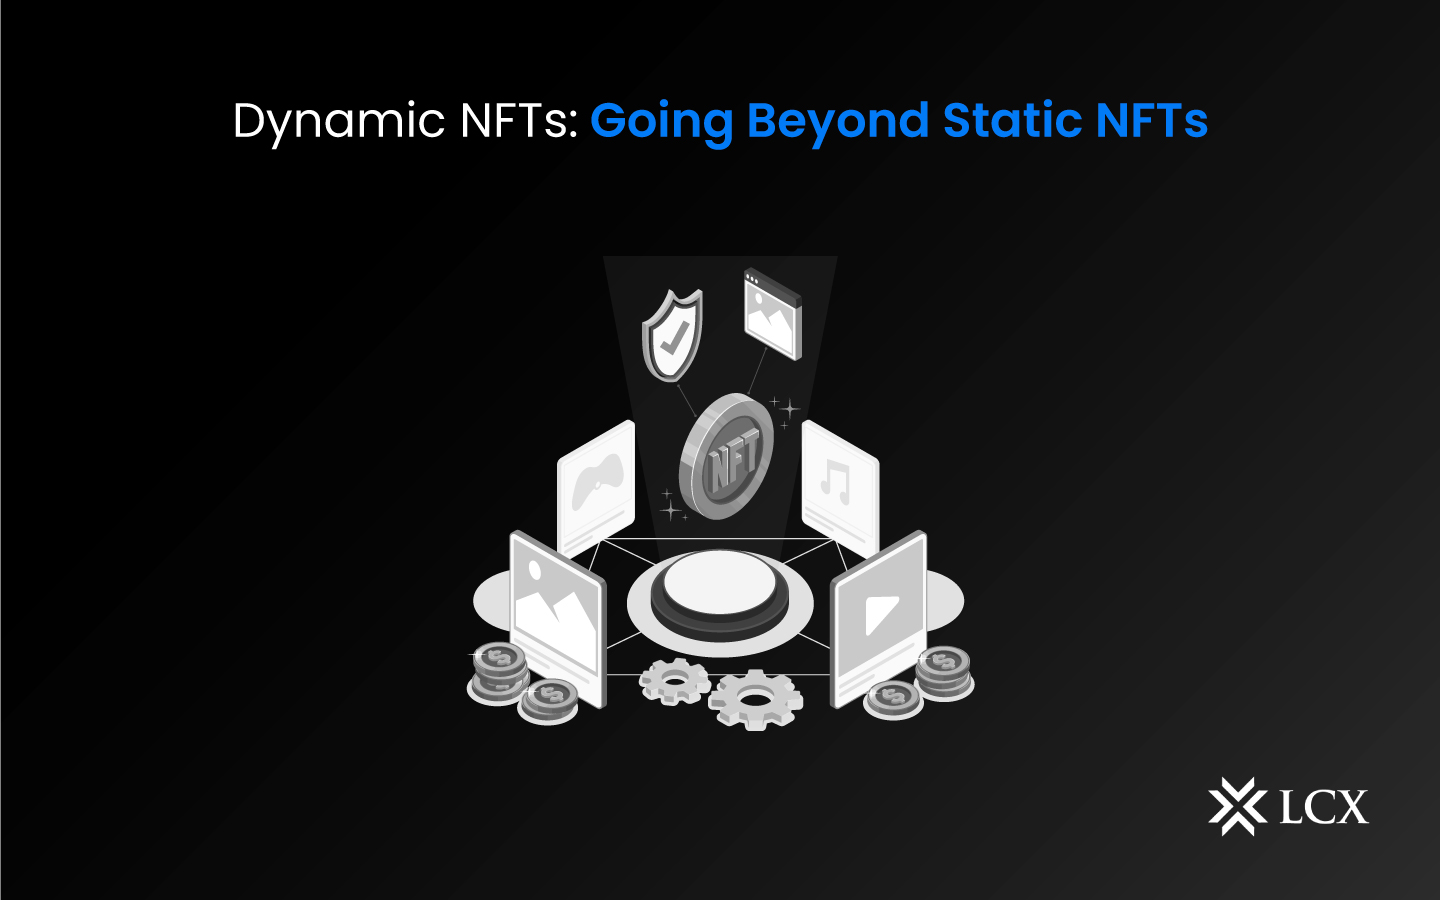 An overview of dynamic NFTs